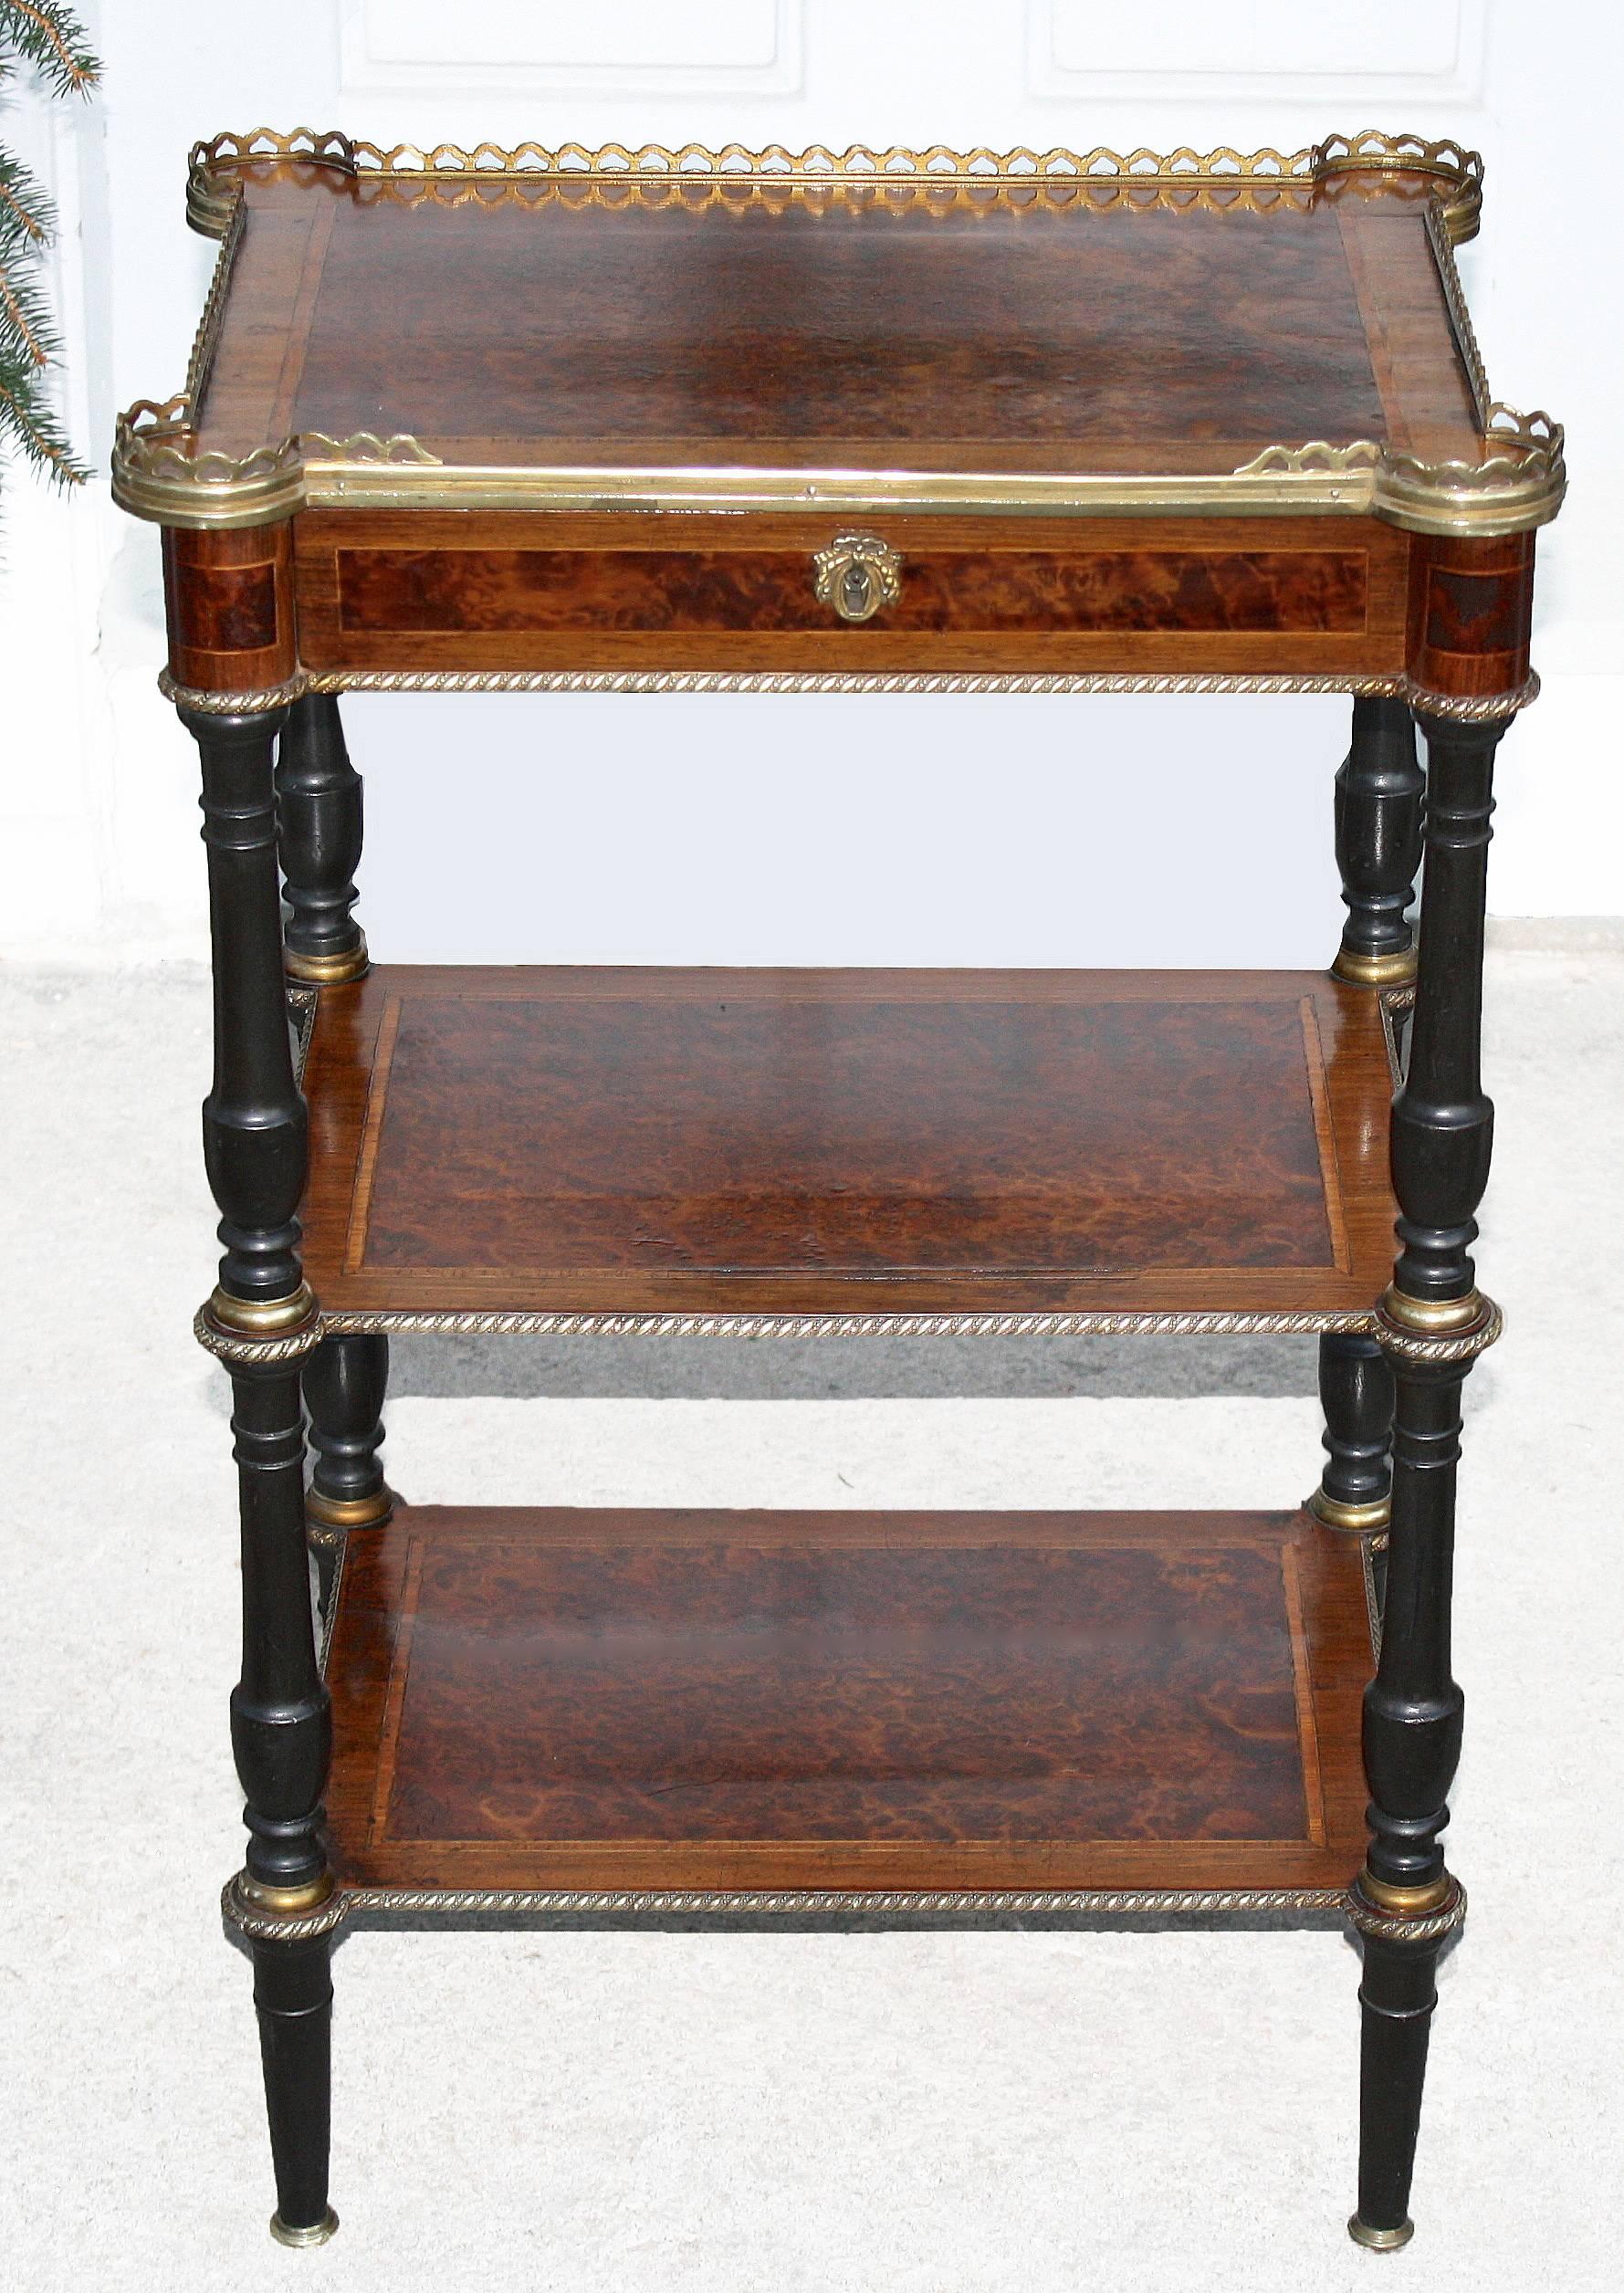 Ormolu galleried and trimmed triple-tiered turret-cornered table with turned ebonized legs. Complex specimen veneers, bandings and inlays of burl, rosewood and satinwood. Drawer with original lock. Remains of a P. Sormani paper label on dust board